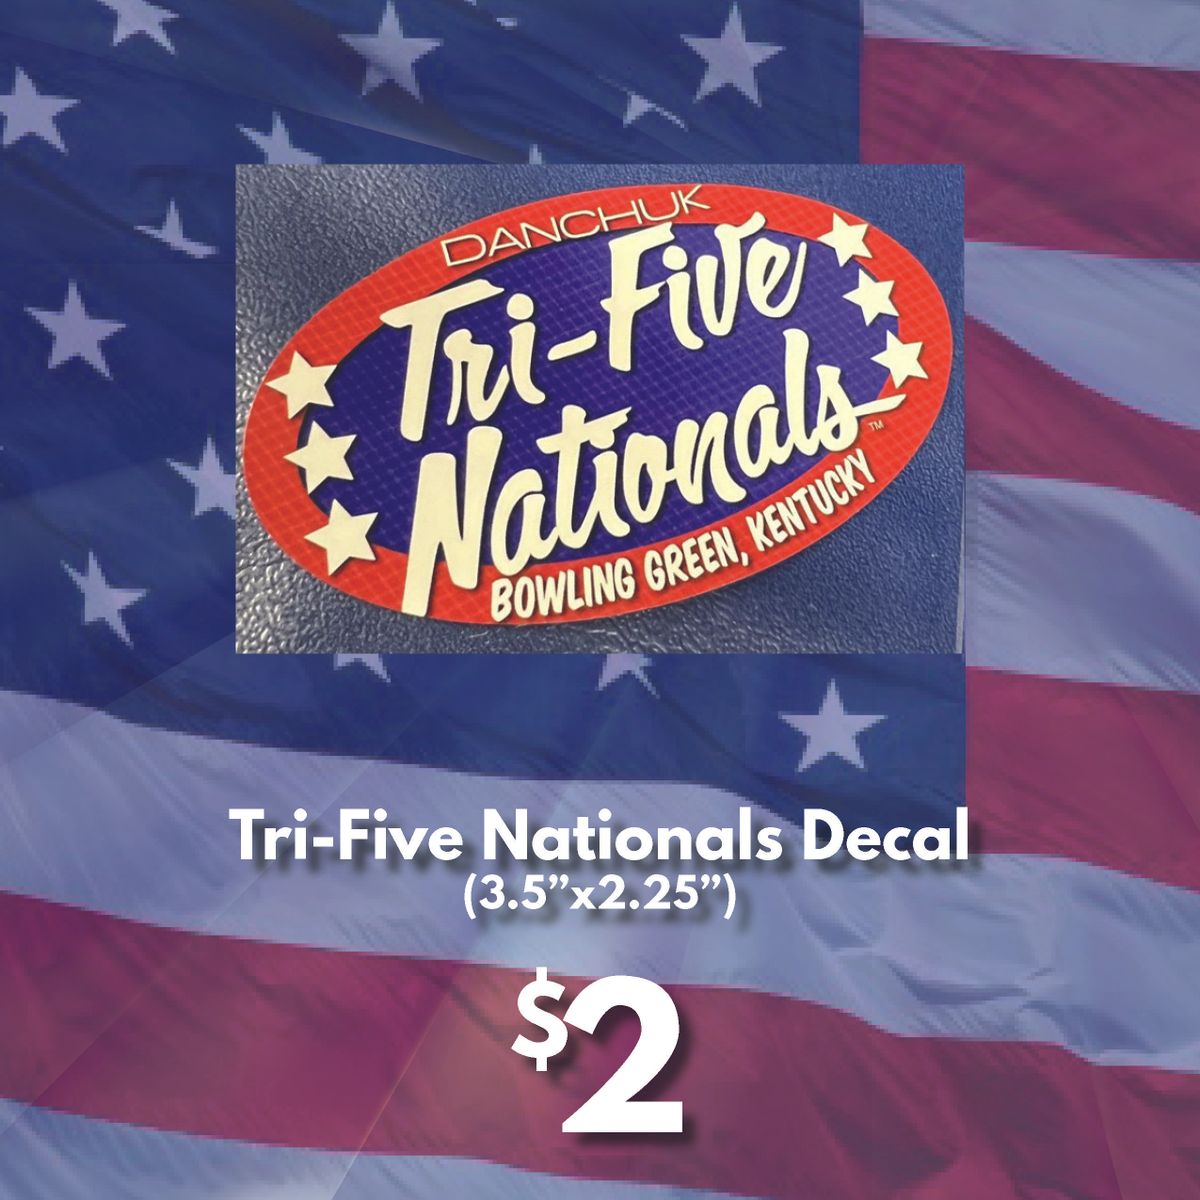 TriFive Nationals Decal